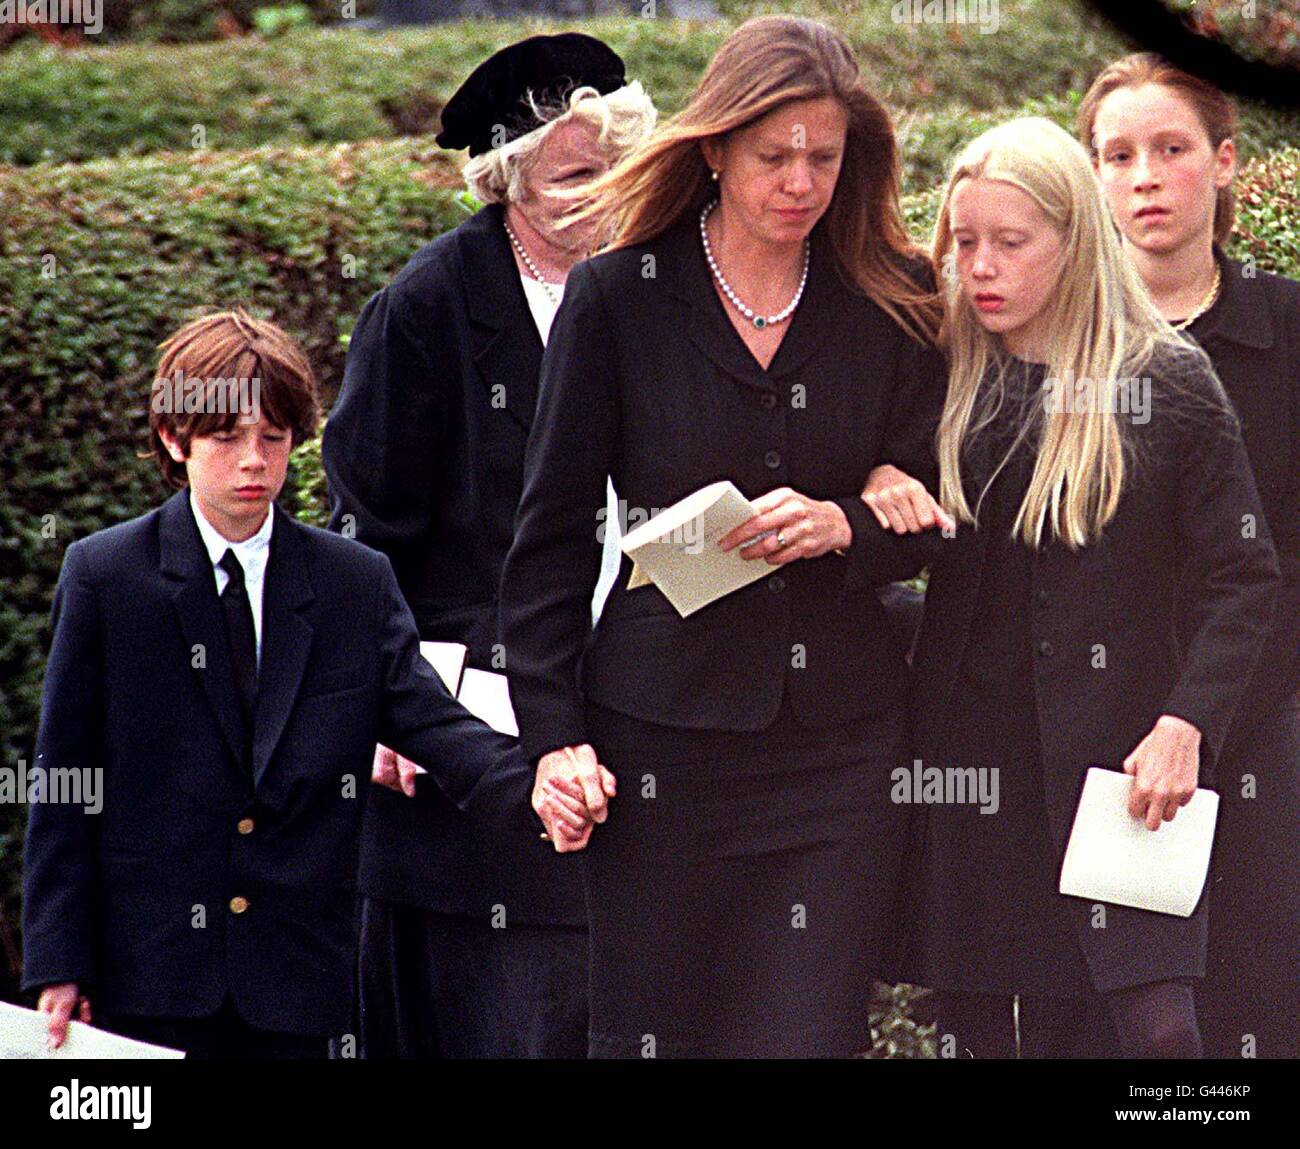 Anita Rothschild, with her family at the funeral of her husband, the financier Amschel Rothschild, who hanged himself in Paris last week. Several hundred mourners gathered today to pay their respects at the funeral of the multi-millionaire, at the Liberal Jewish Synagogue in Willesden, north west London. See PA story FUNERAL Rothschild. Photo by Michael Stephens/PA Stock Photo